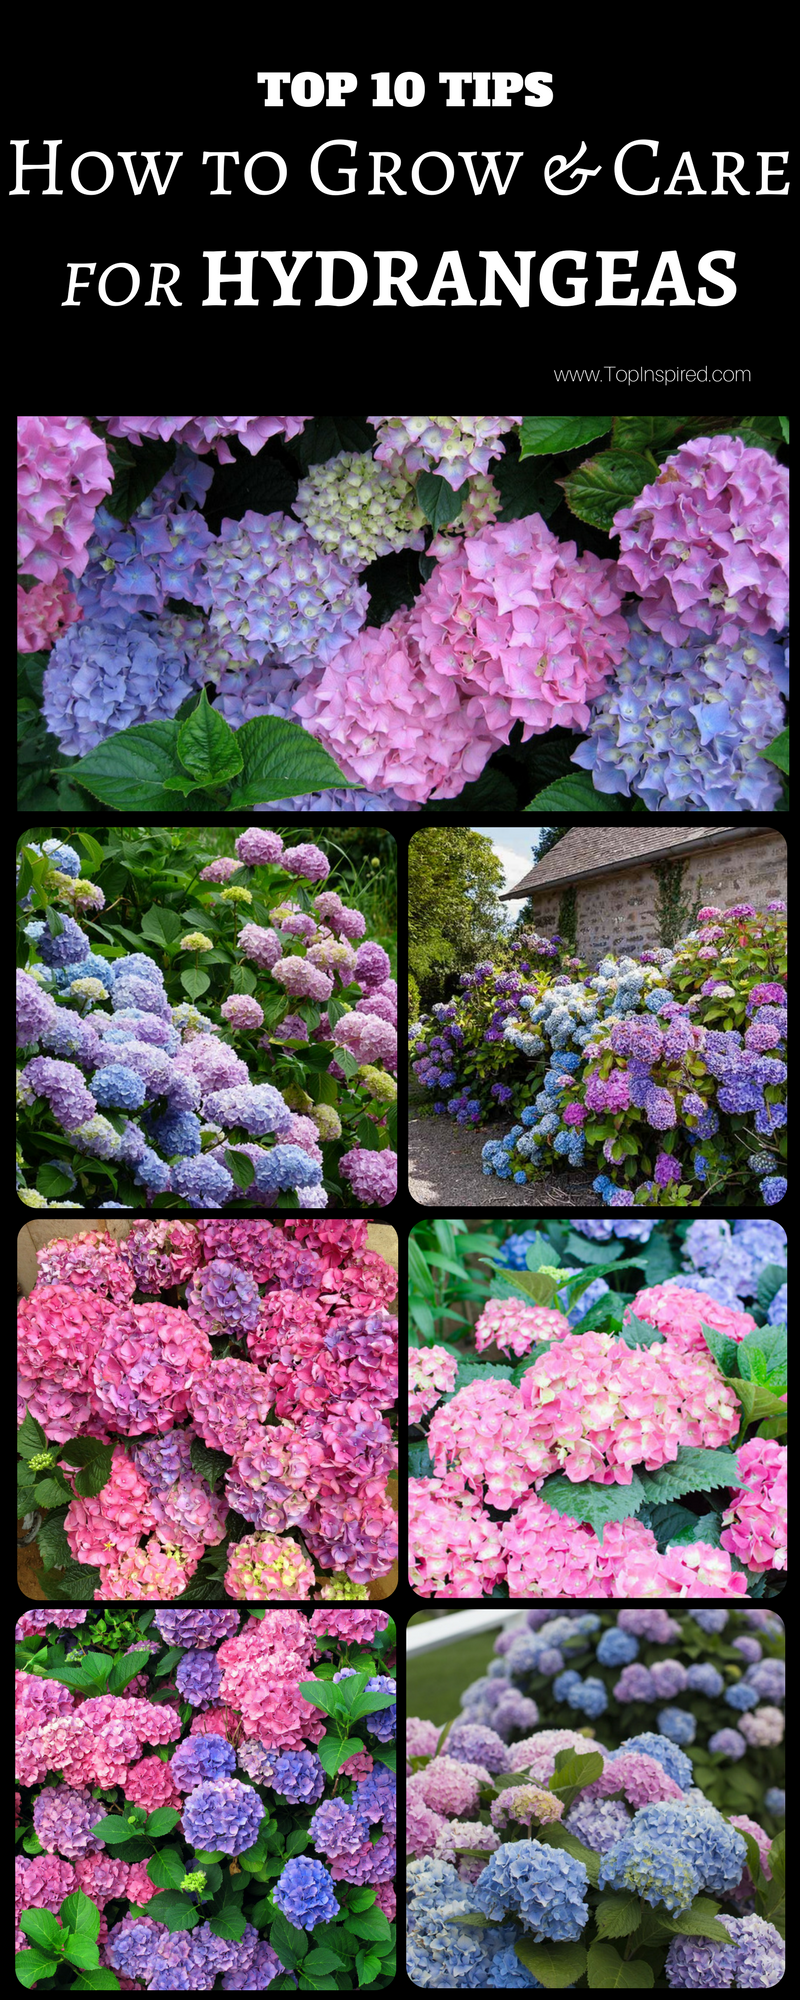 Top 10 Tips on How to Plant, Grow and Care for Hydrangeas | Garden Tips | Tips and instructions for planting and caring for